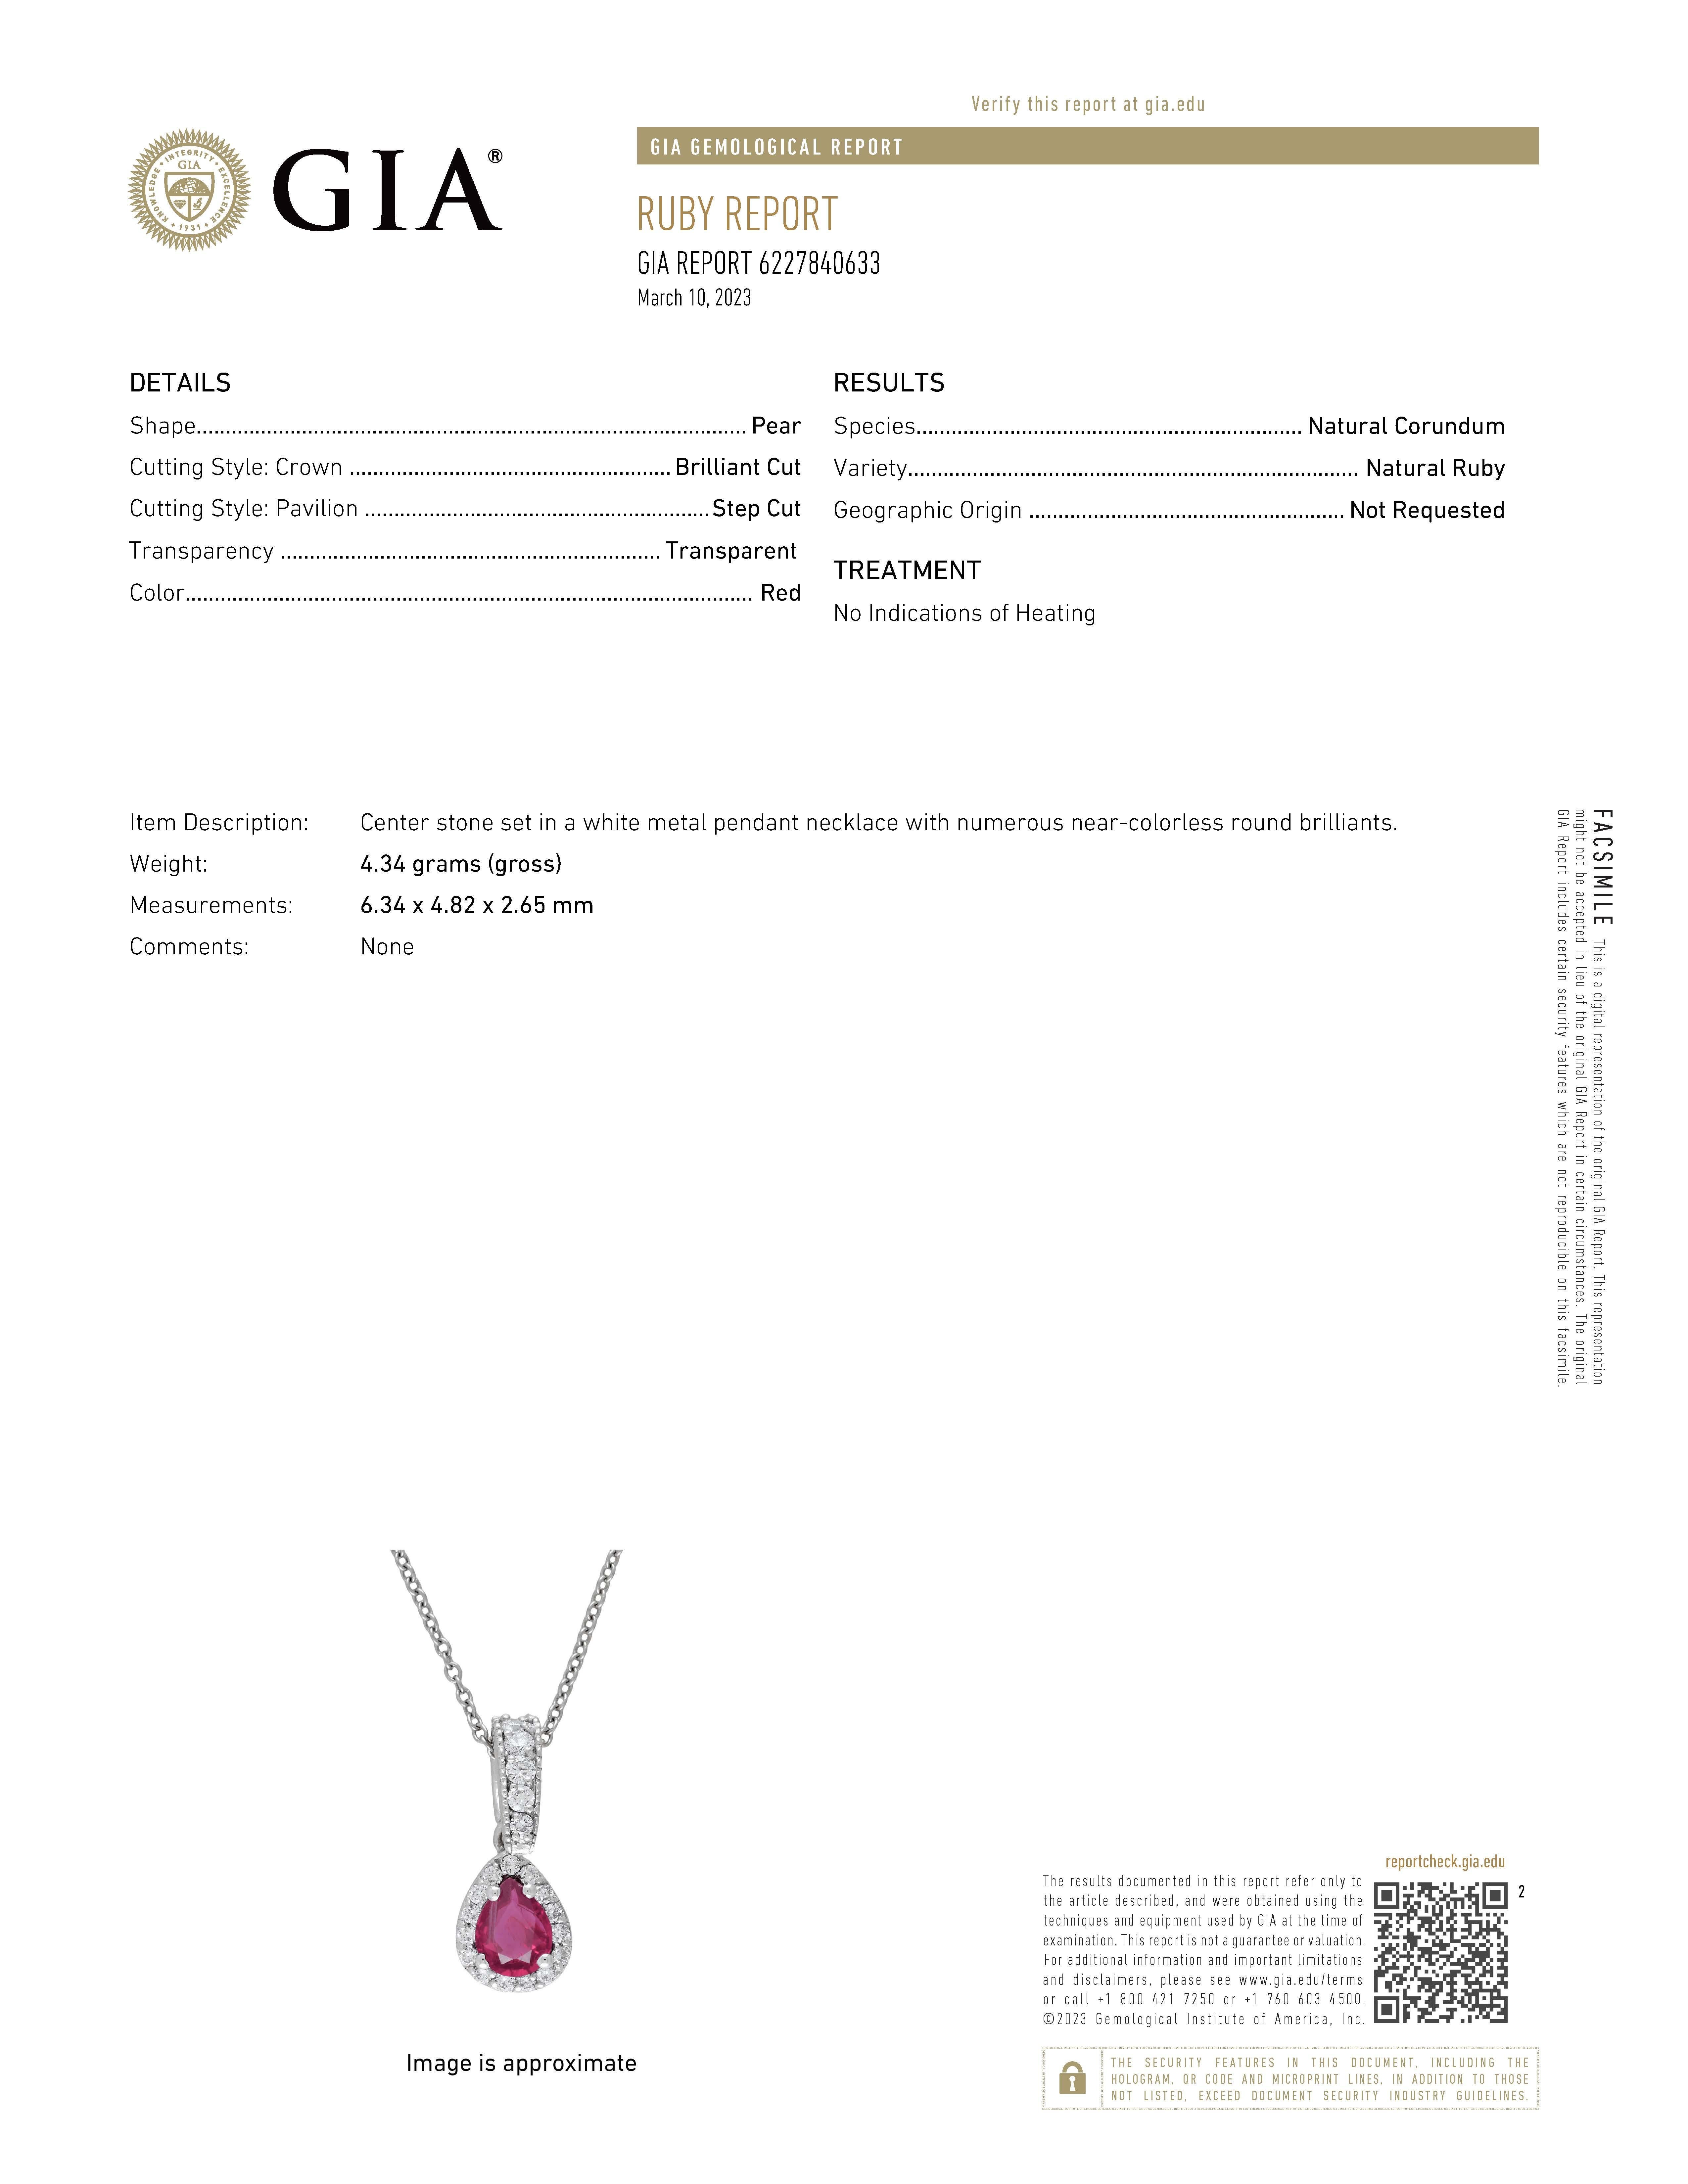 The GIA No Heat Burma Pear Shaped Ruby Diamond Platinum Pendant Necklace is a high-end piece of jewelry that features a pear-shaped Burmese ruby at its center. The ruby has been certified by the Gemological Institute of America (GIA) as having no